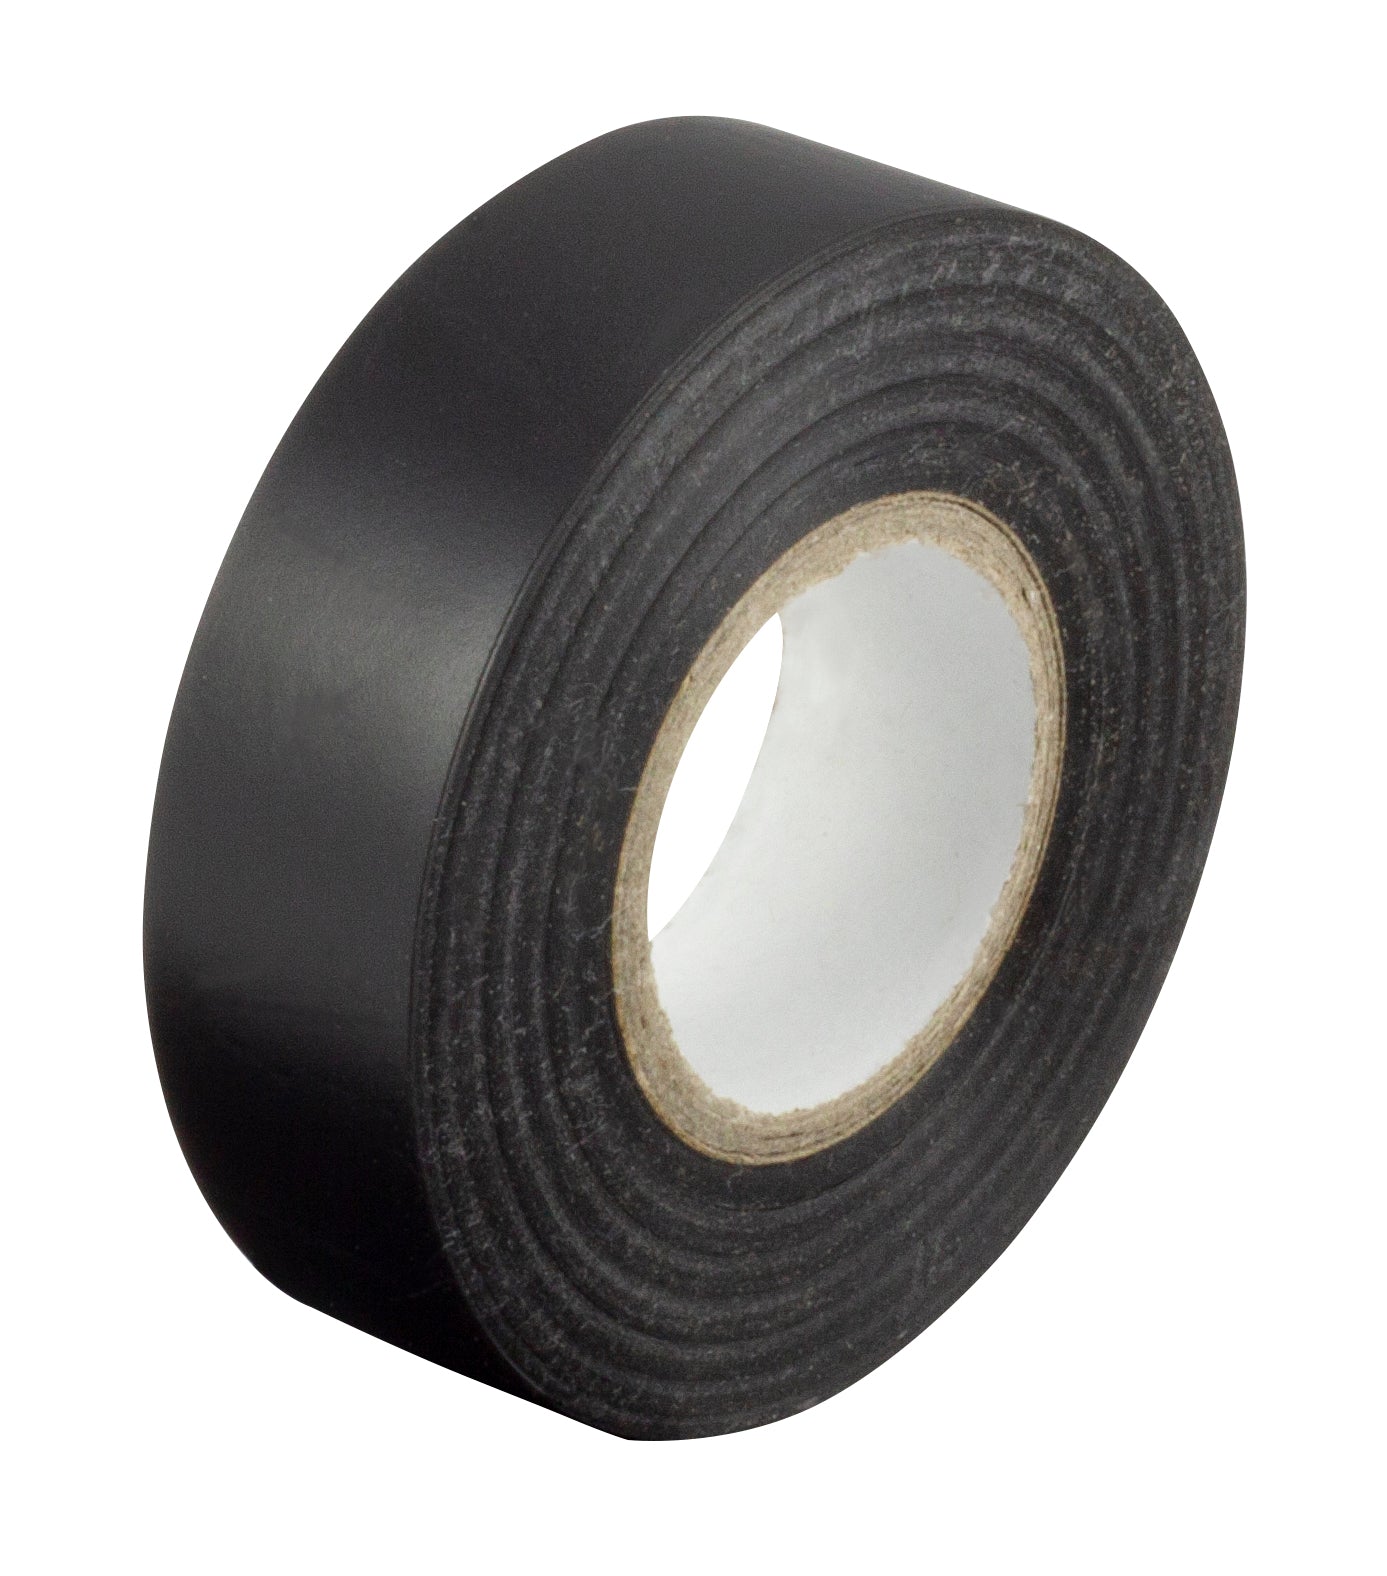 PVC Tape Size: 19mmx20m Roll - BLACK - Pack of 10